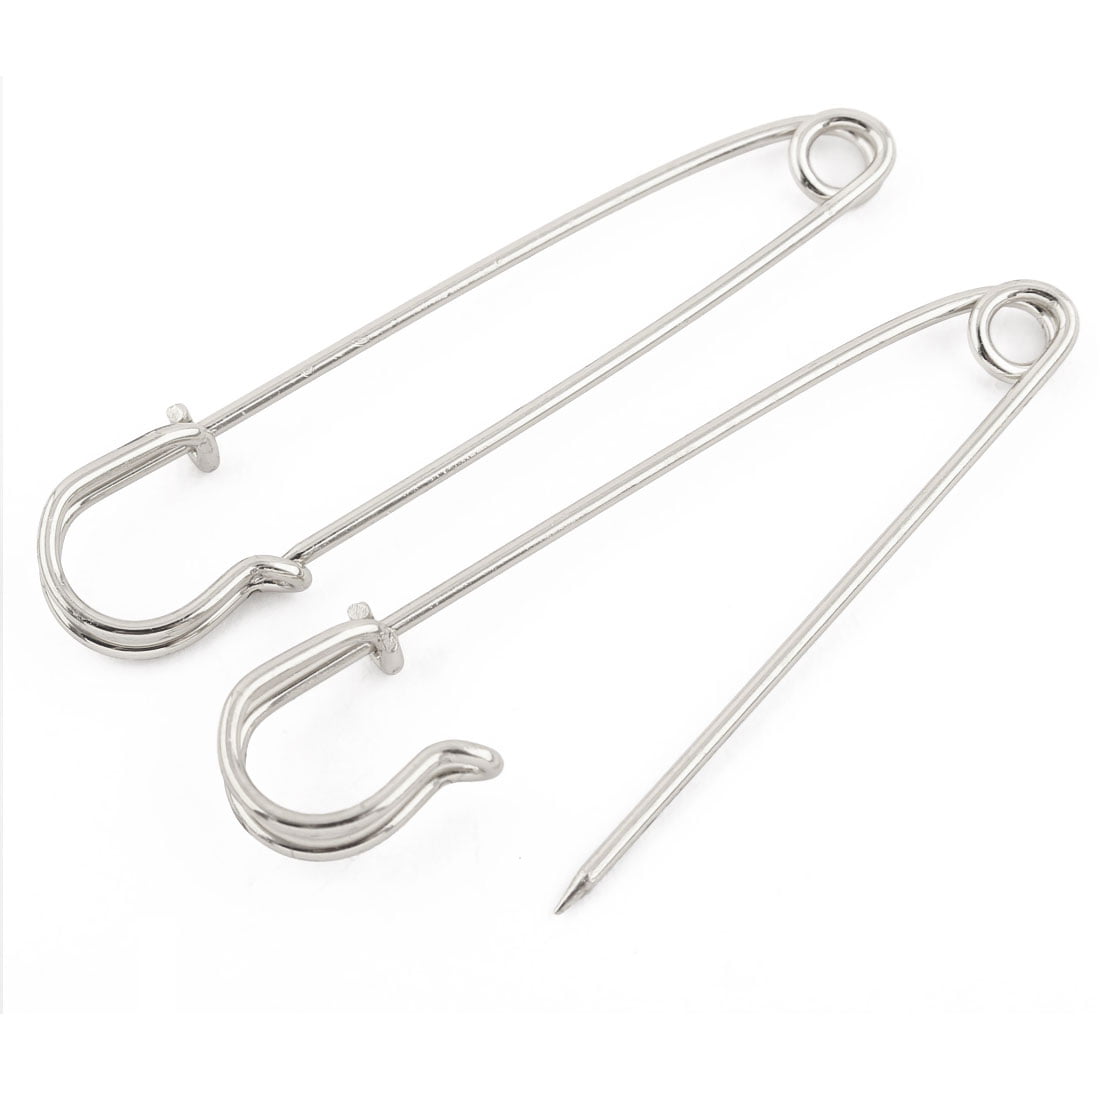 Skirts Kilts Crafts Fastening Safety Pins Brooches Silver Tone 6.5cm ...